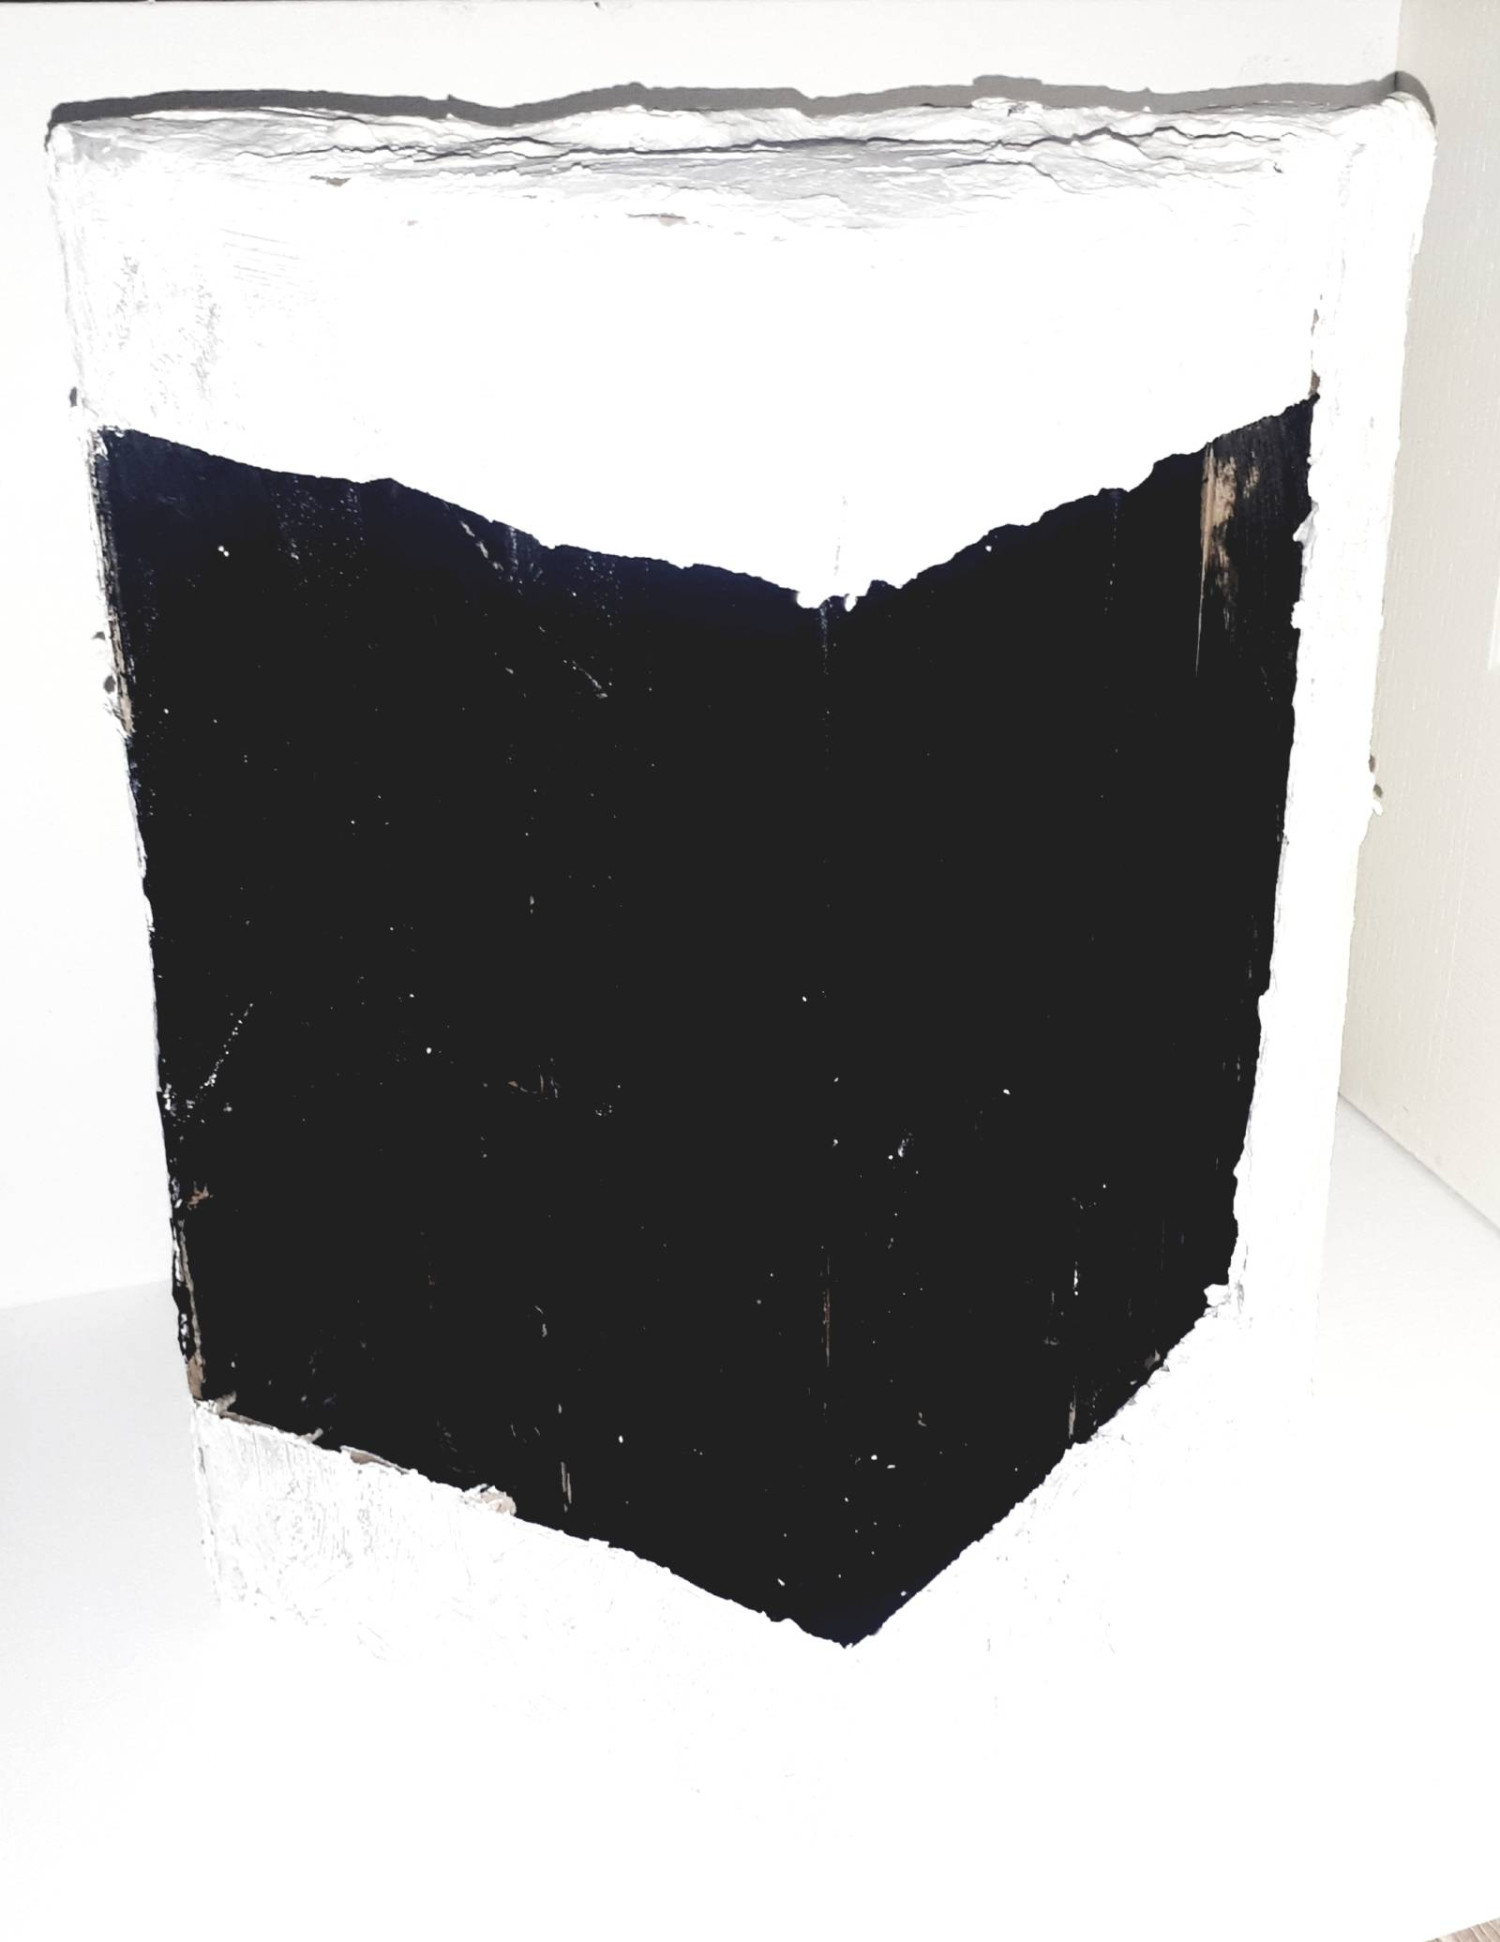 *untitled*, plaster, acrylics, cardboard, photographed in black & white